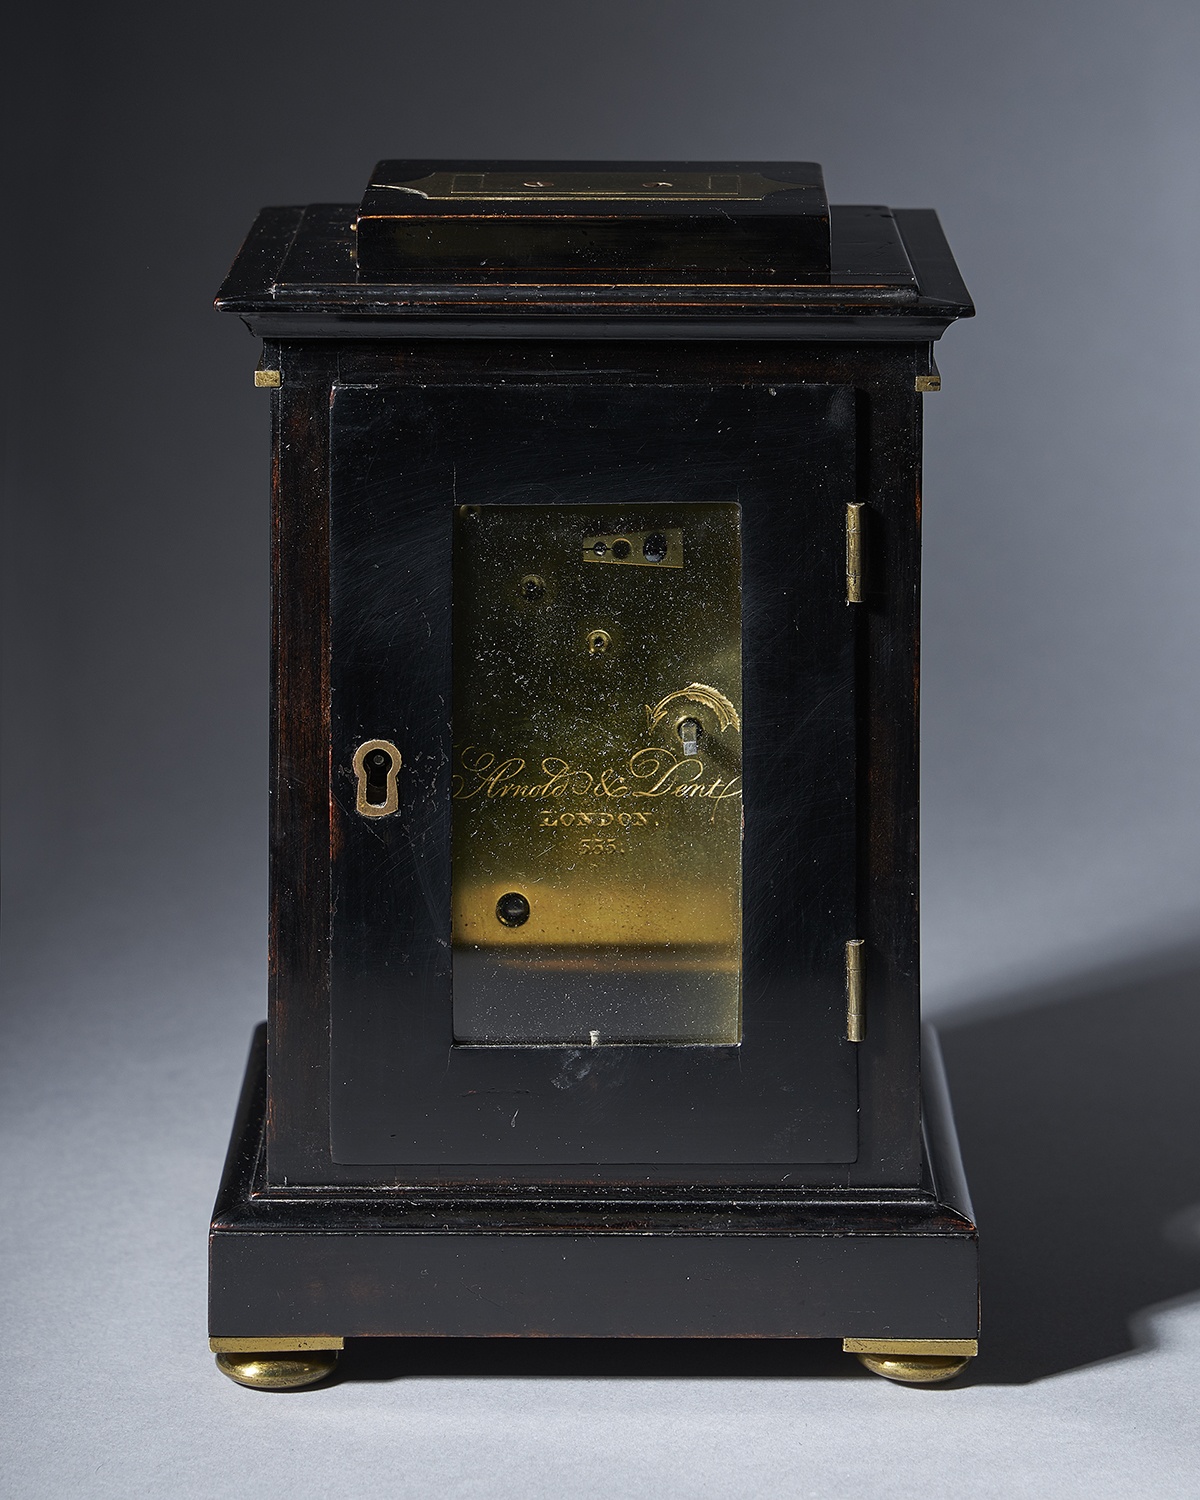 A Unique And Fine Mid 19th-Century Travelling Clock By Celebrated Makers Arnold & Dent, London 6